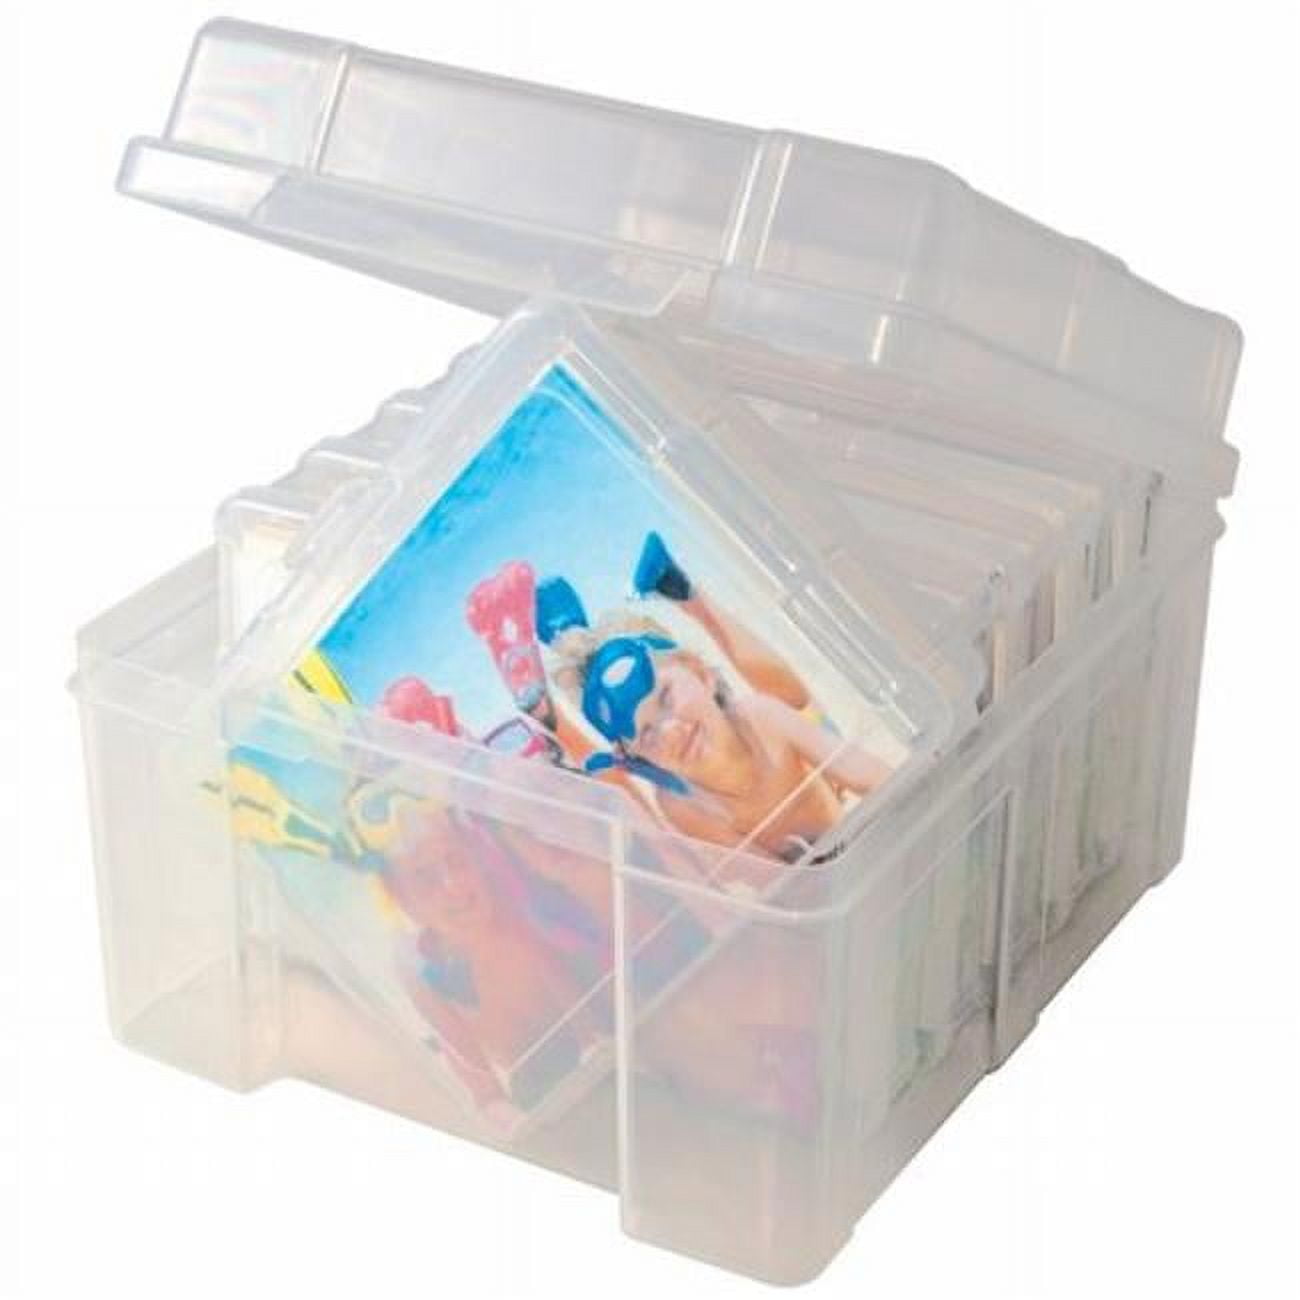 Jigitz 4x6 Photo Storage Box with Carrier - Clear Compartment